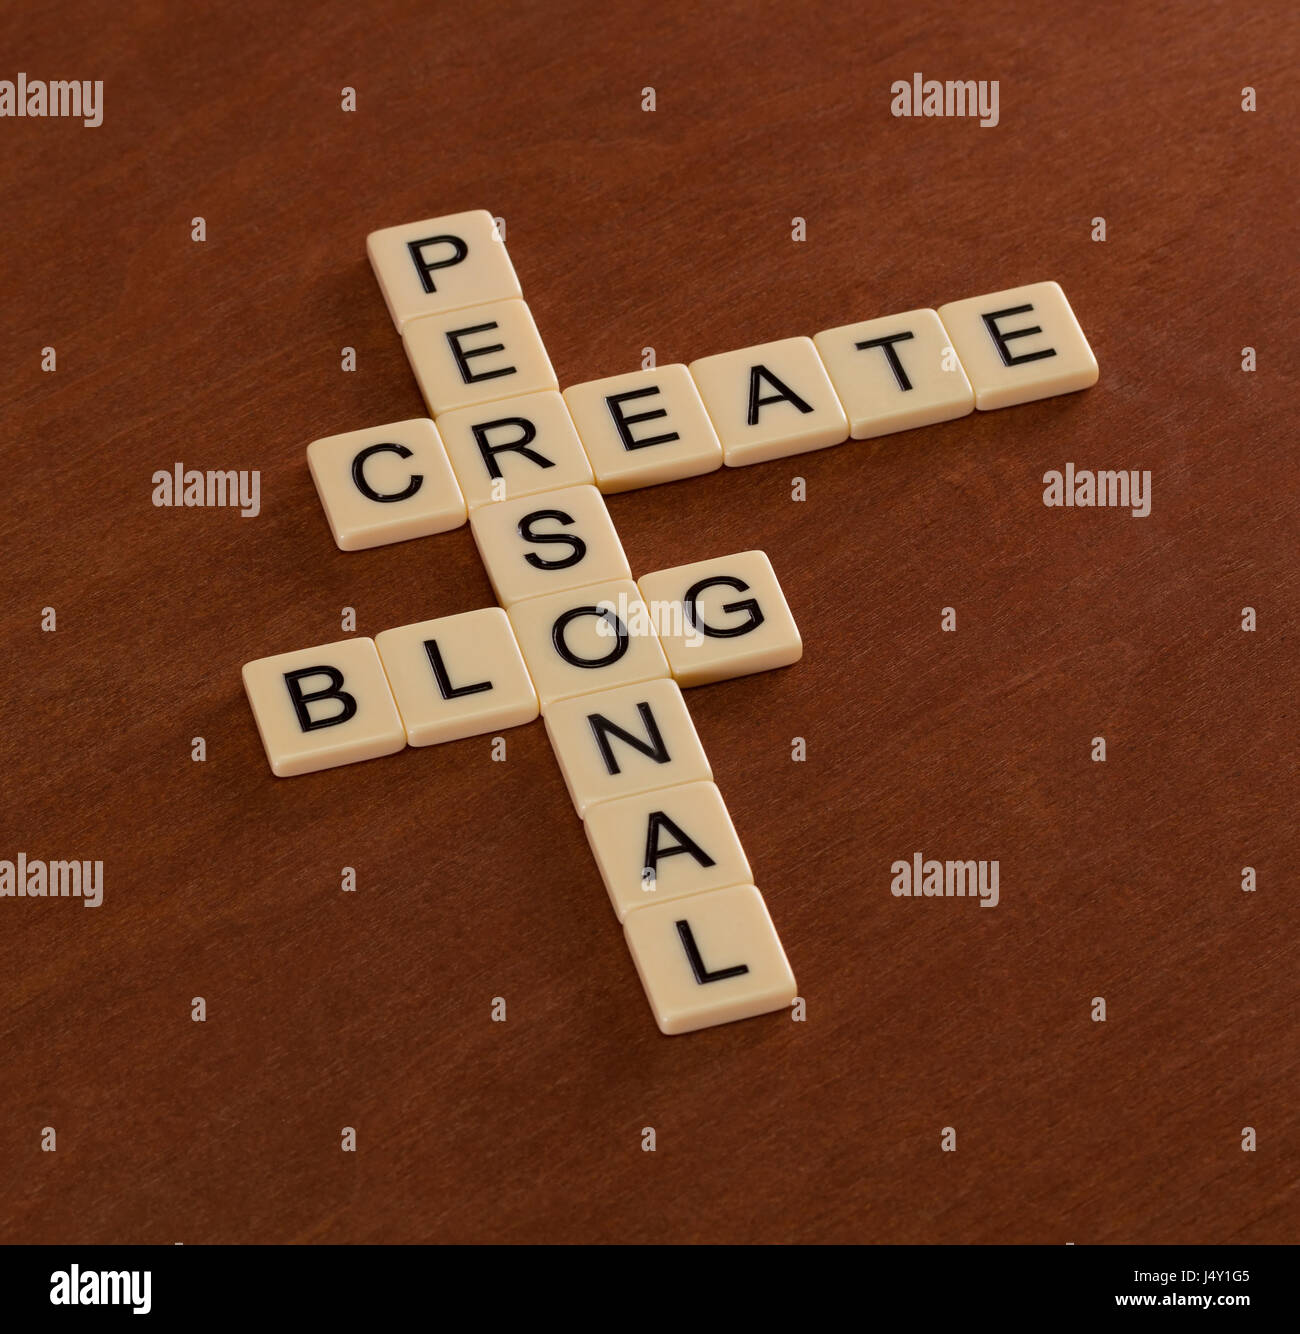 Crossword puzzle with words Create Personal Blog. Social networking concept. Ivory tiles with capital letters on mahogany board. Stock Photo